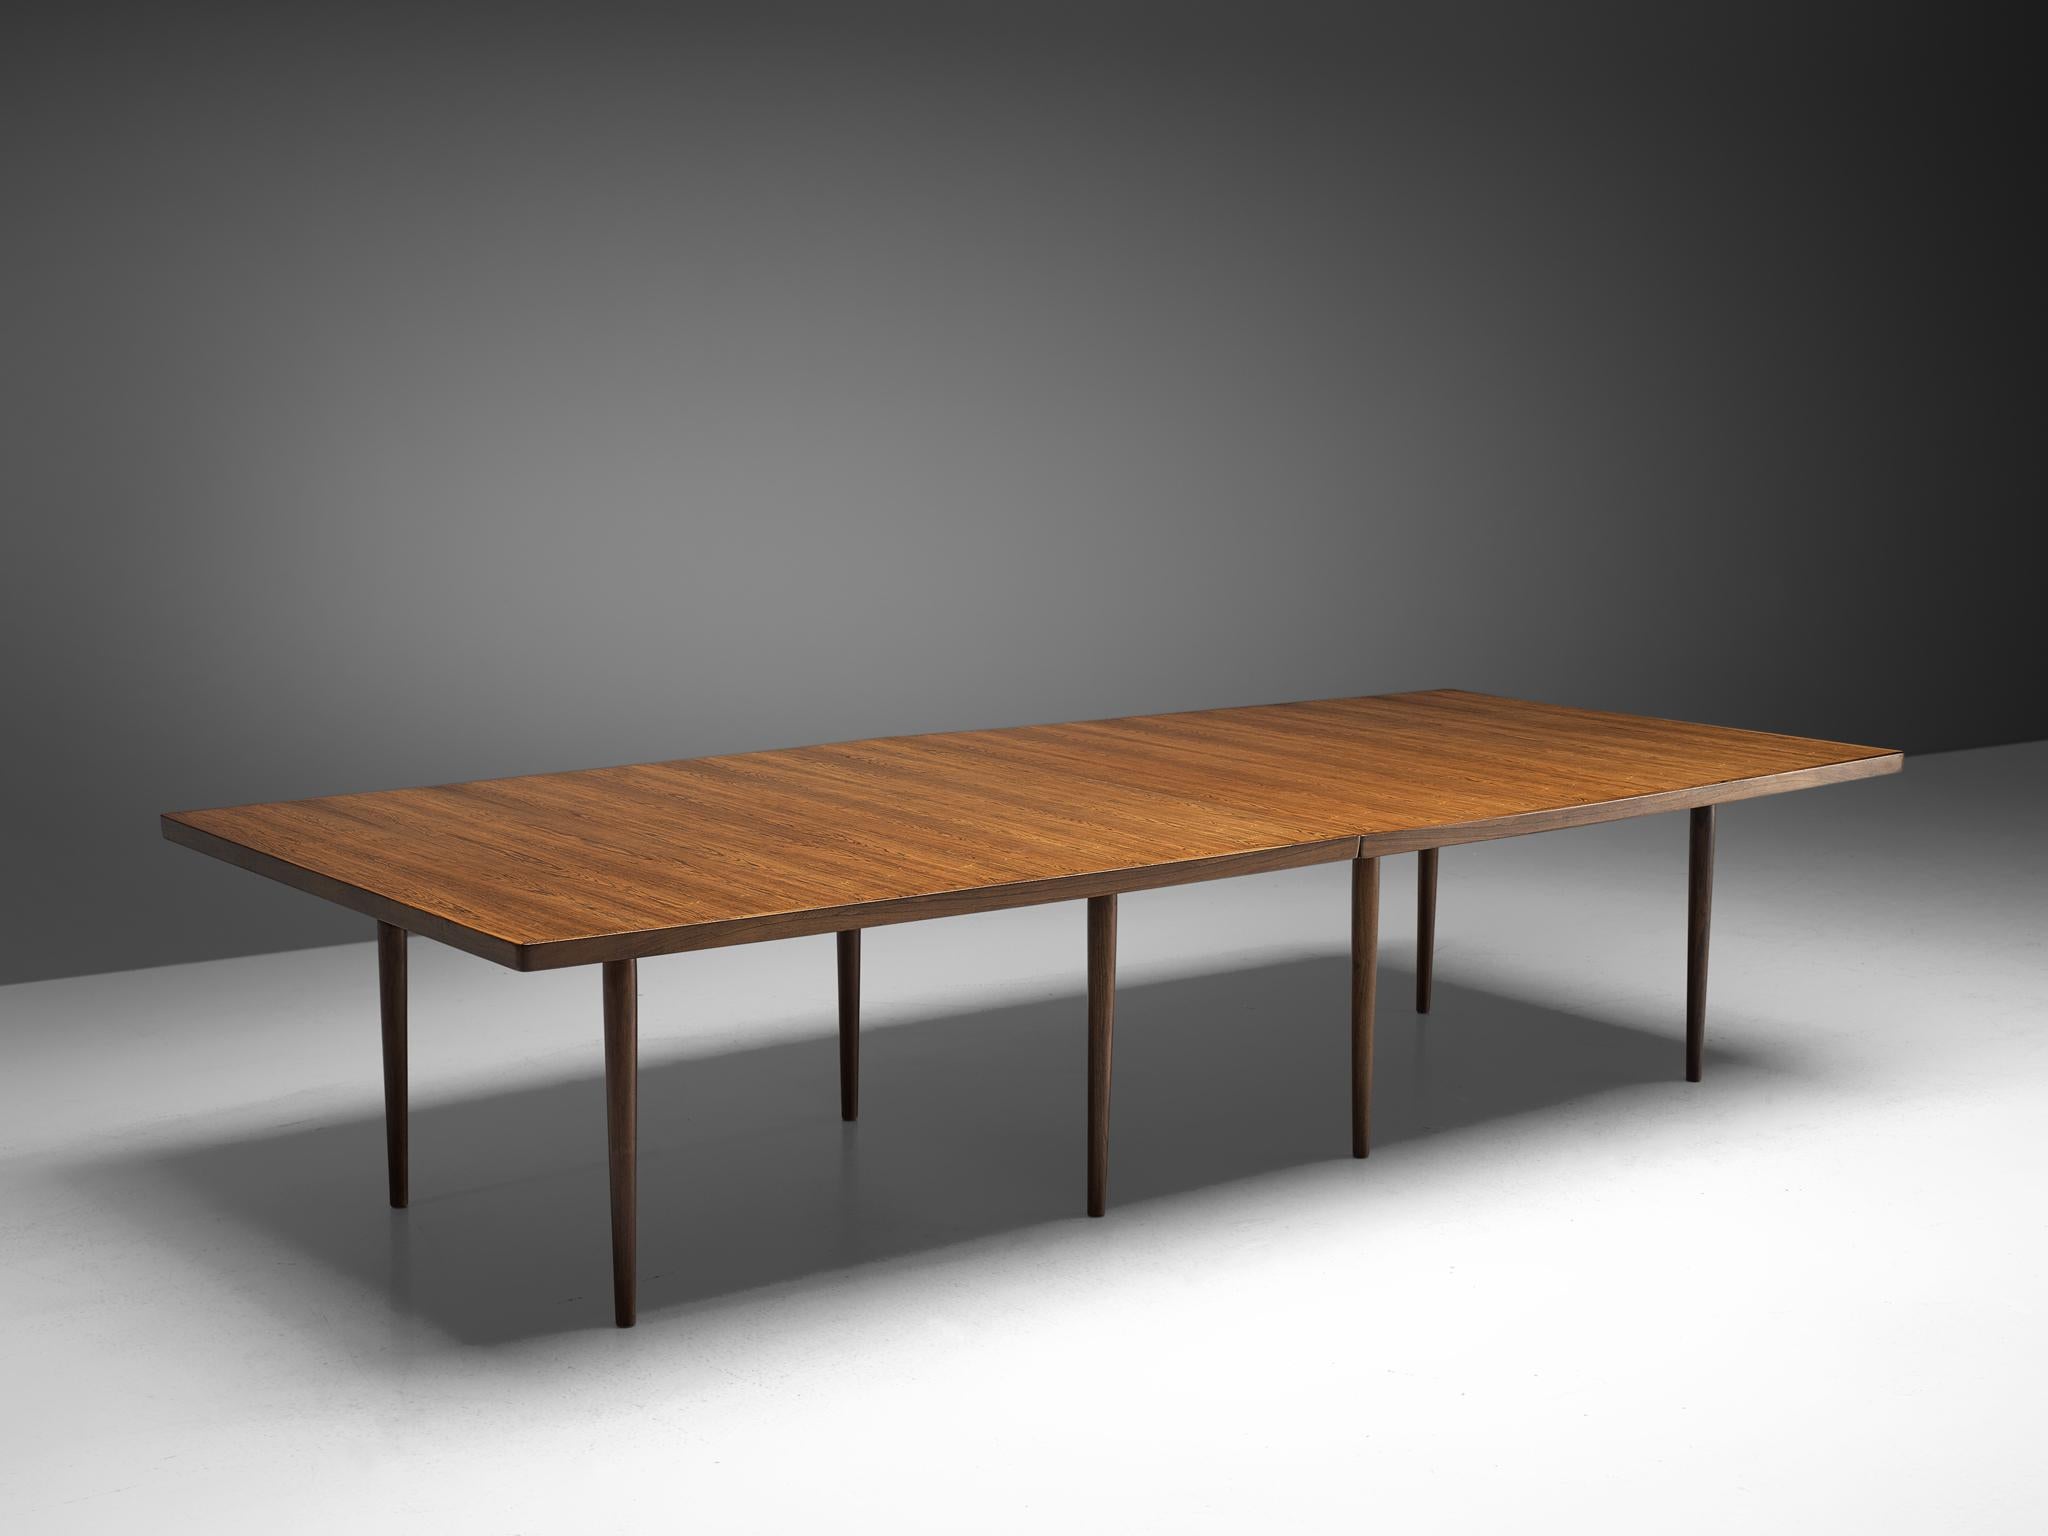 Arne Vodder for Sibast, dining table, Denmark, 1960s

Large conference table or dining table by Arne Vodder for Sibast Furniture. The table tops consists of two similar parts hold together by metal connections. The top is visually highlighted by the